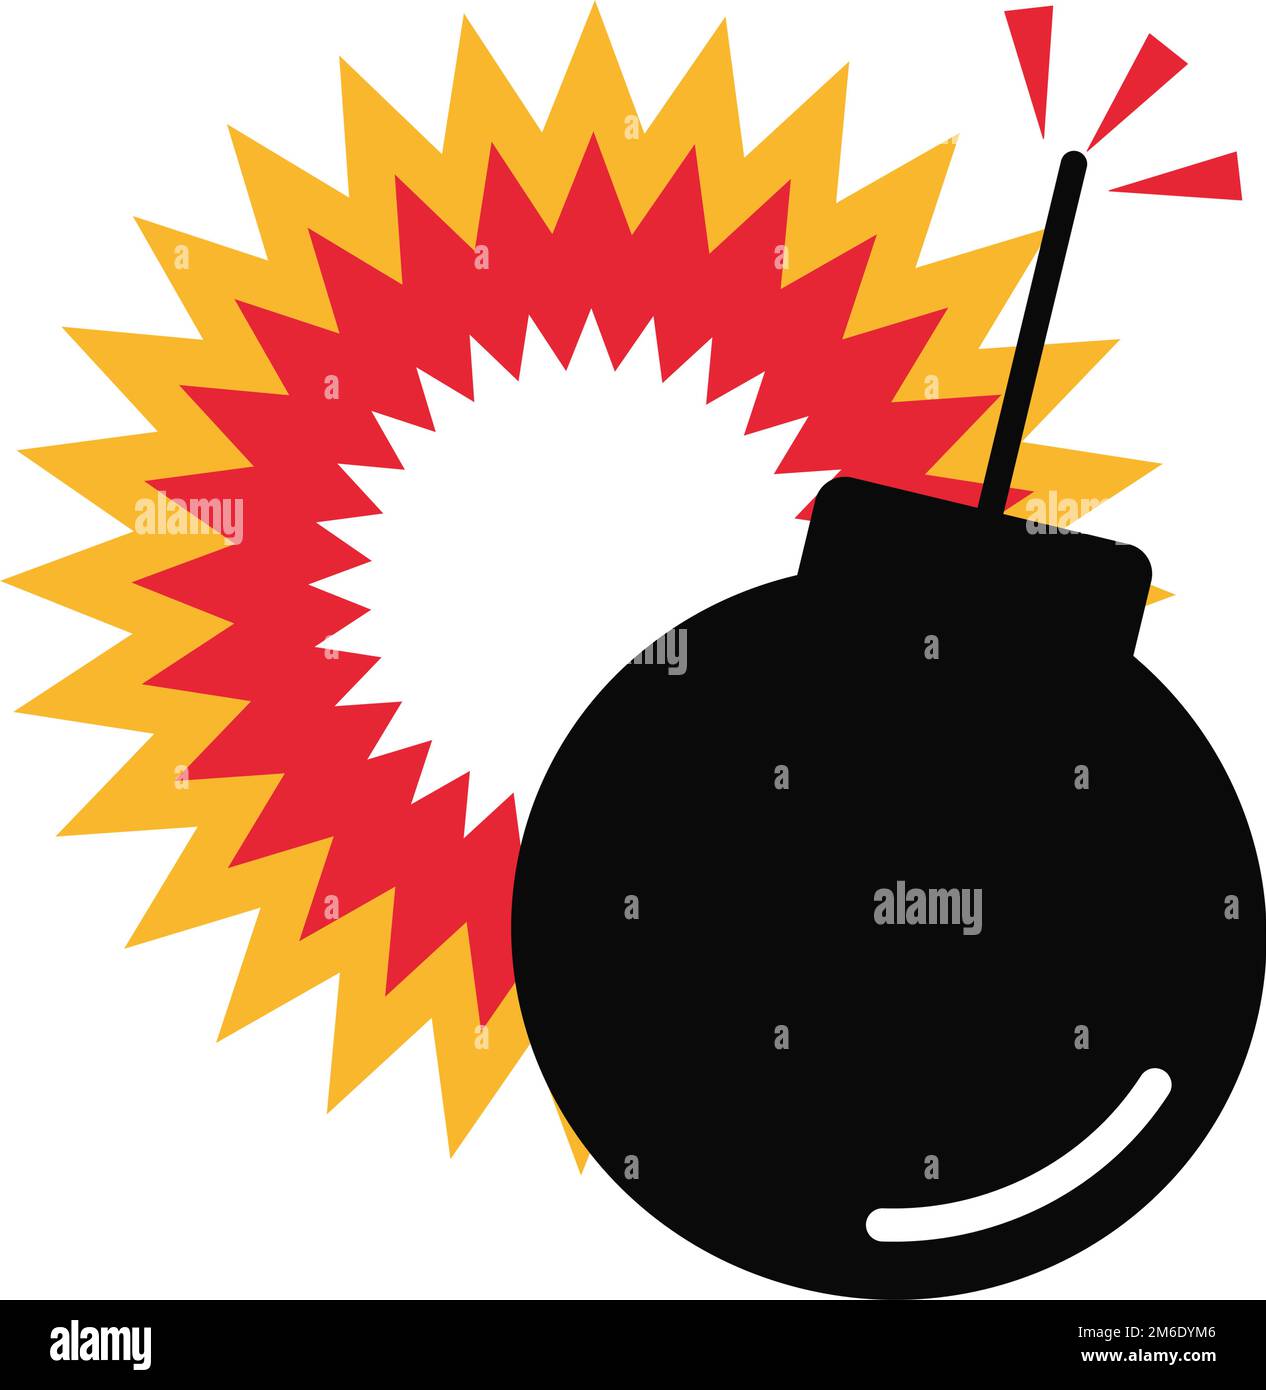 Bomb and explosion icon. Explosion impact. Editable vector. Stock Vector